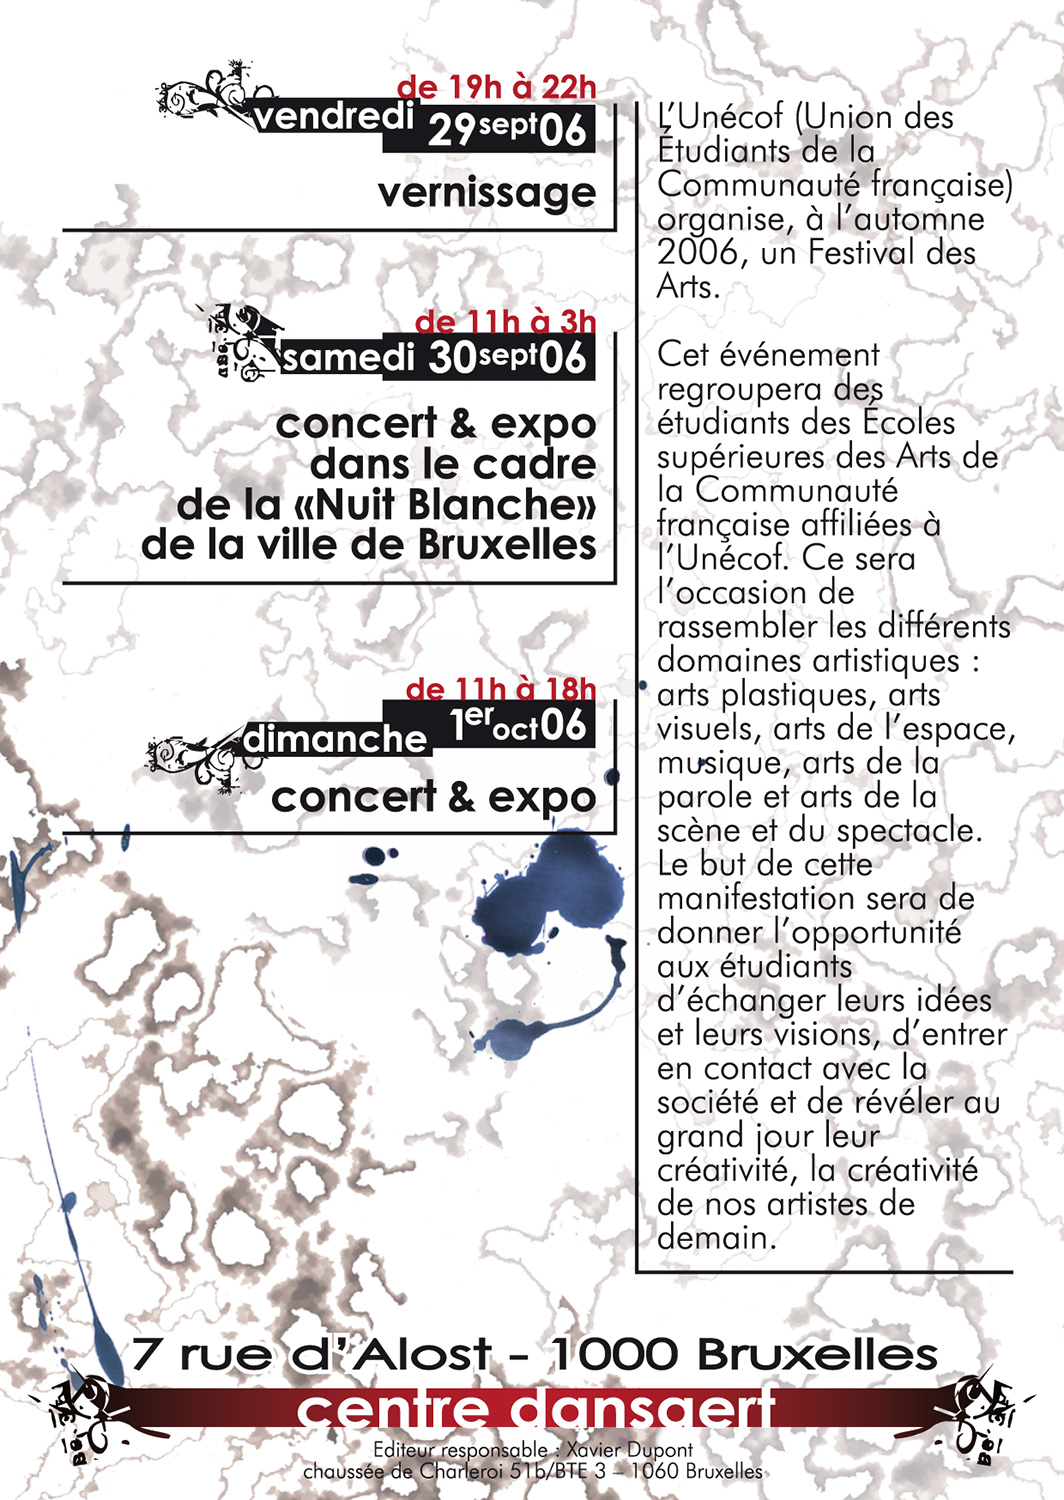 Rear flyer of a Student Arts Festival with informations and 